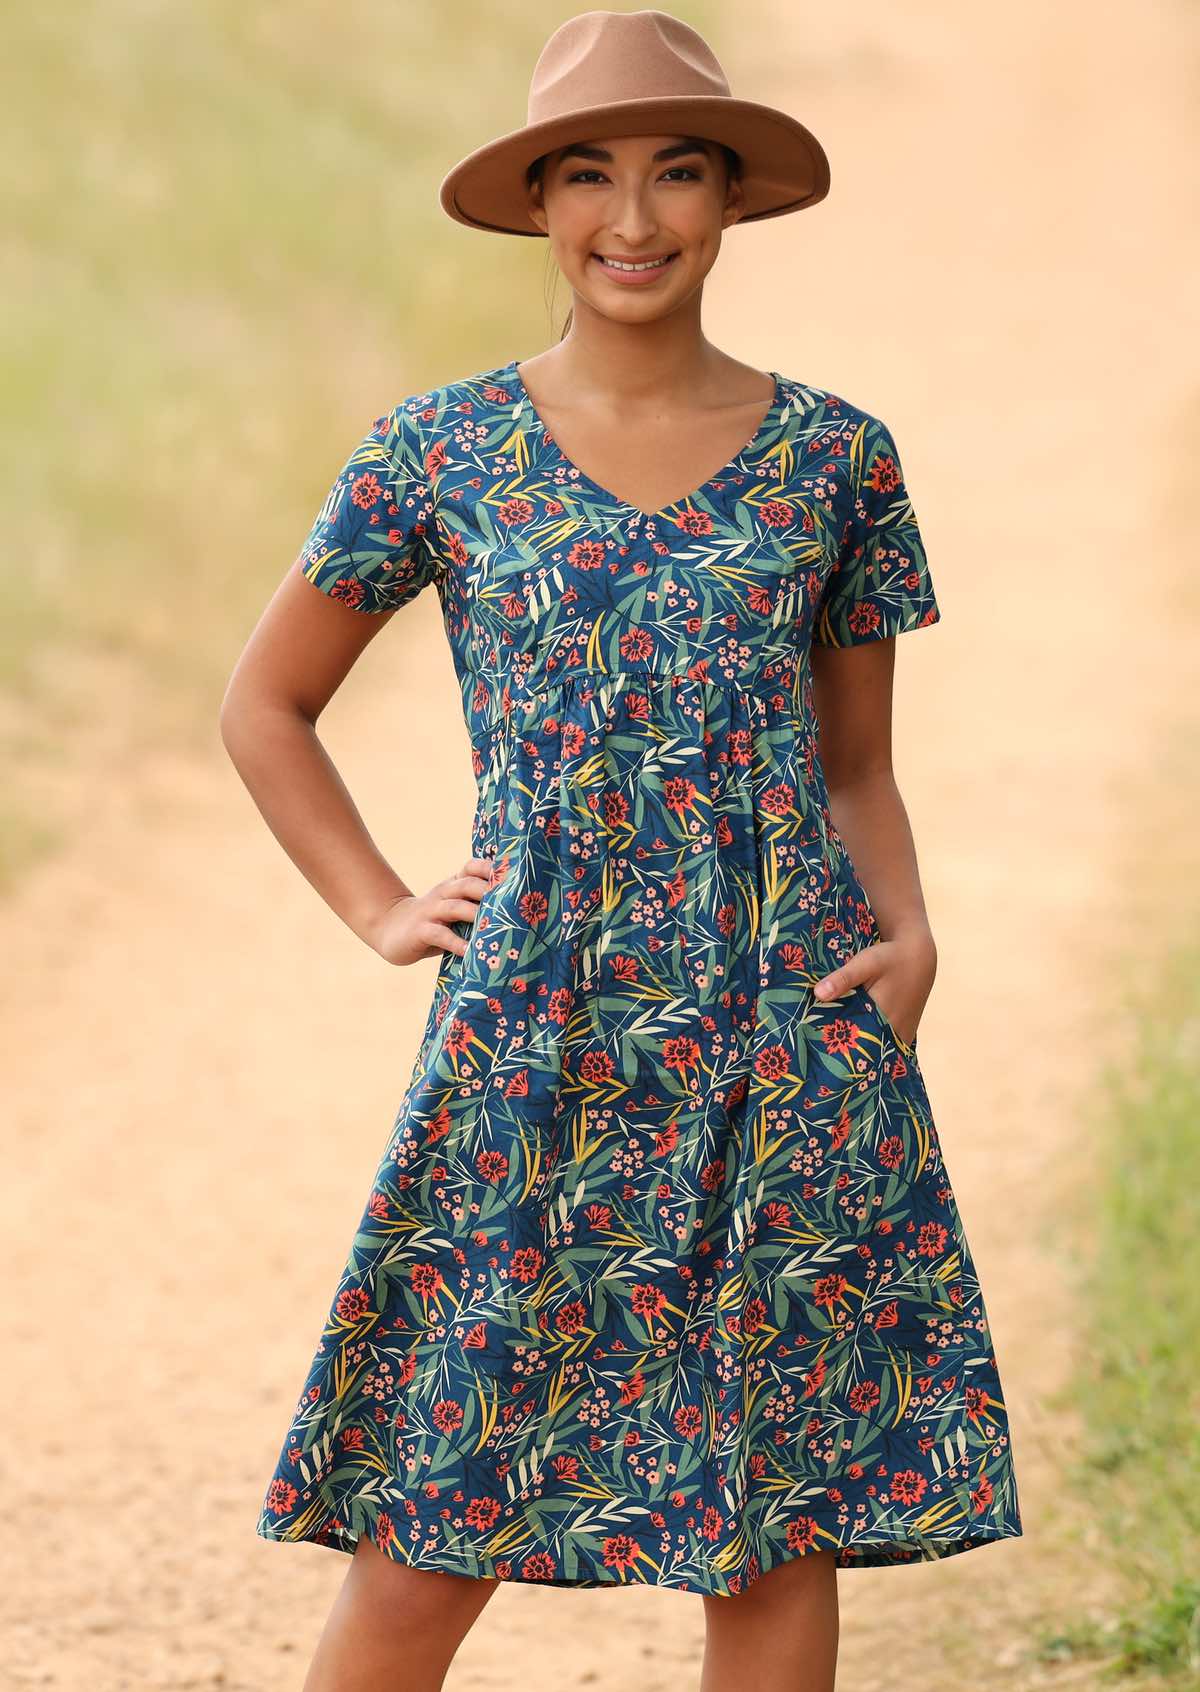 Model styles cotton dress with a hat. 